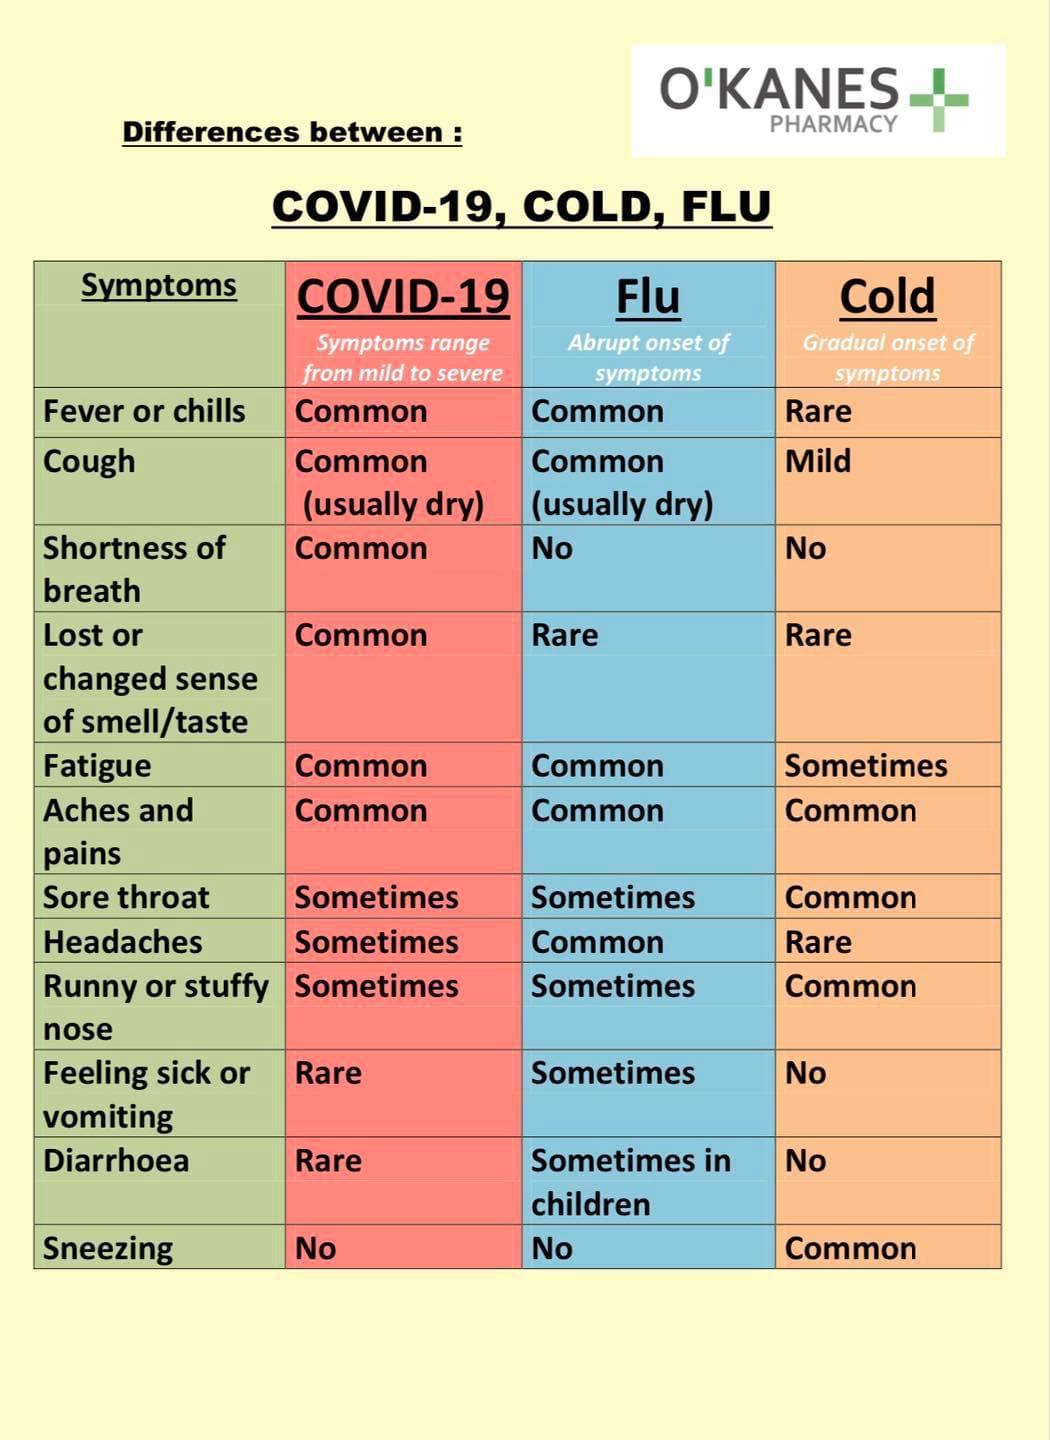 Differences between Covid-19, Cold & Flu